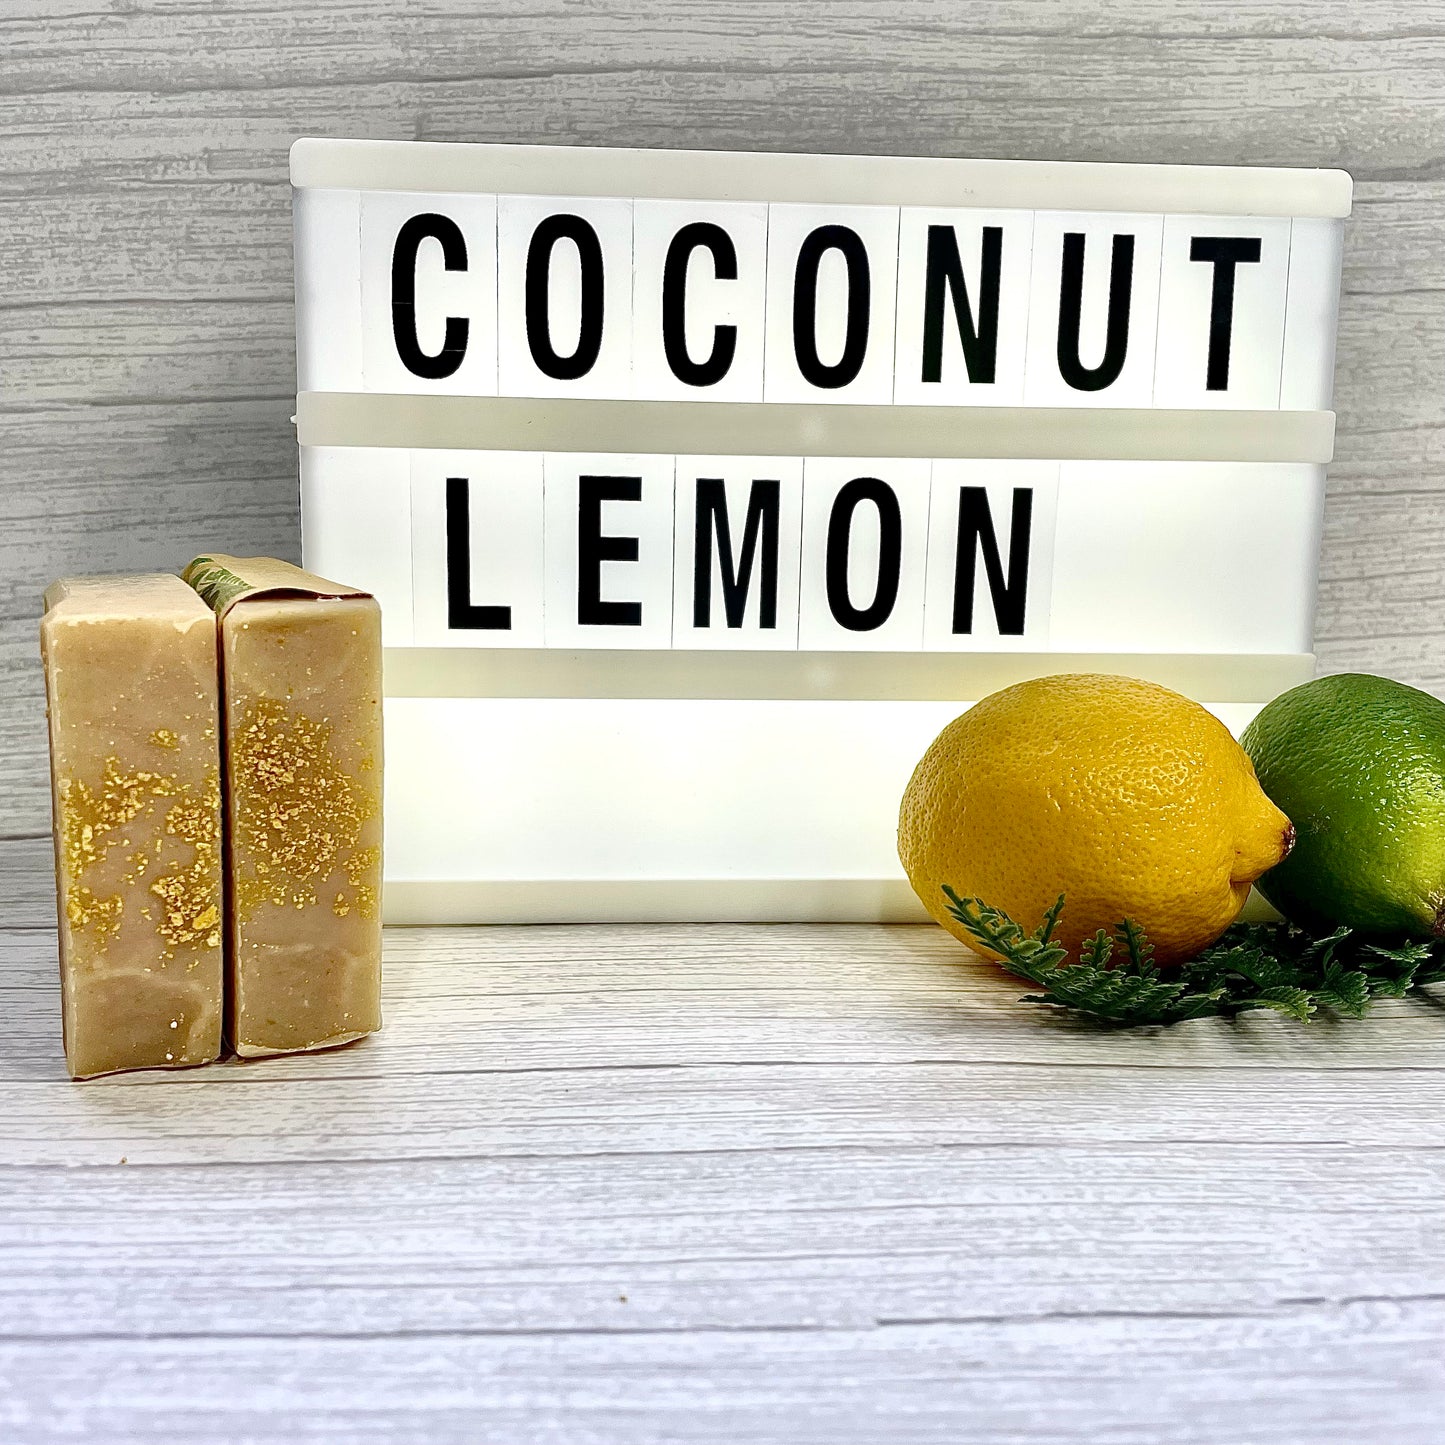 Coconut Lemon billboard with 2 handcrafted soaps positioned to show the tops sprinkled with real lemon peel